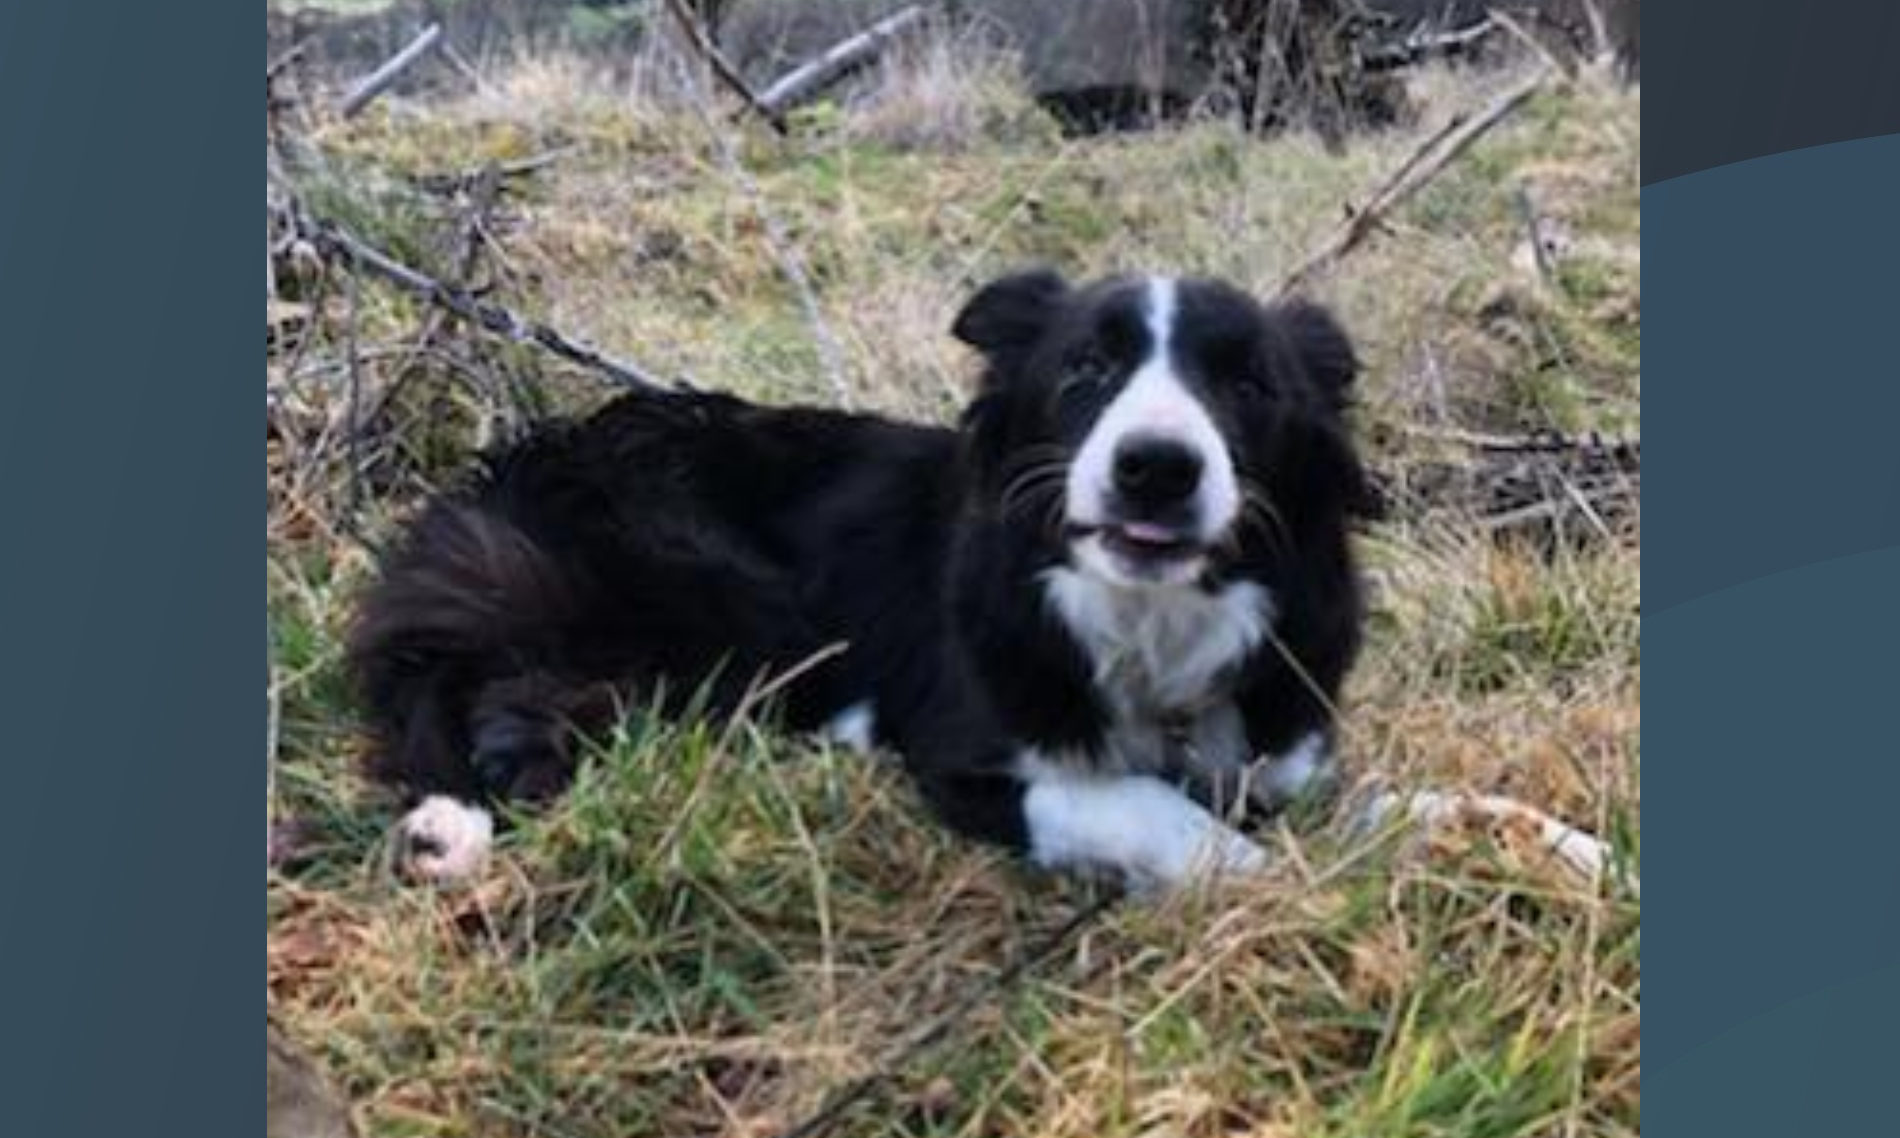 Gale the collie has been found.